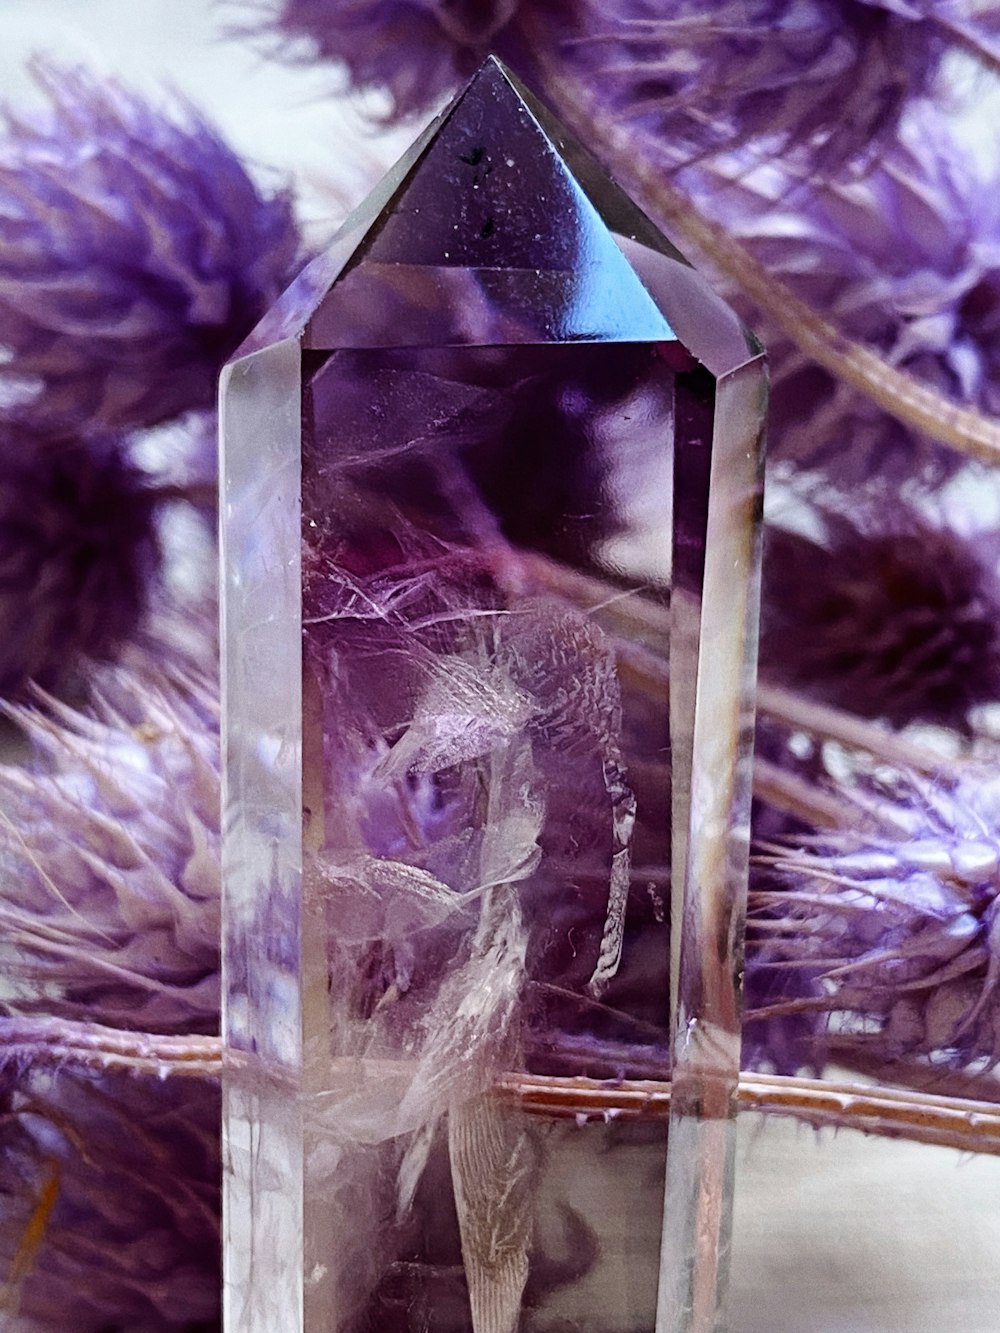 a purple crystal with a figure inside of it